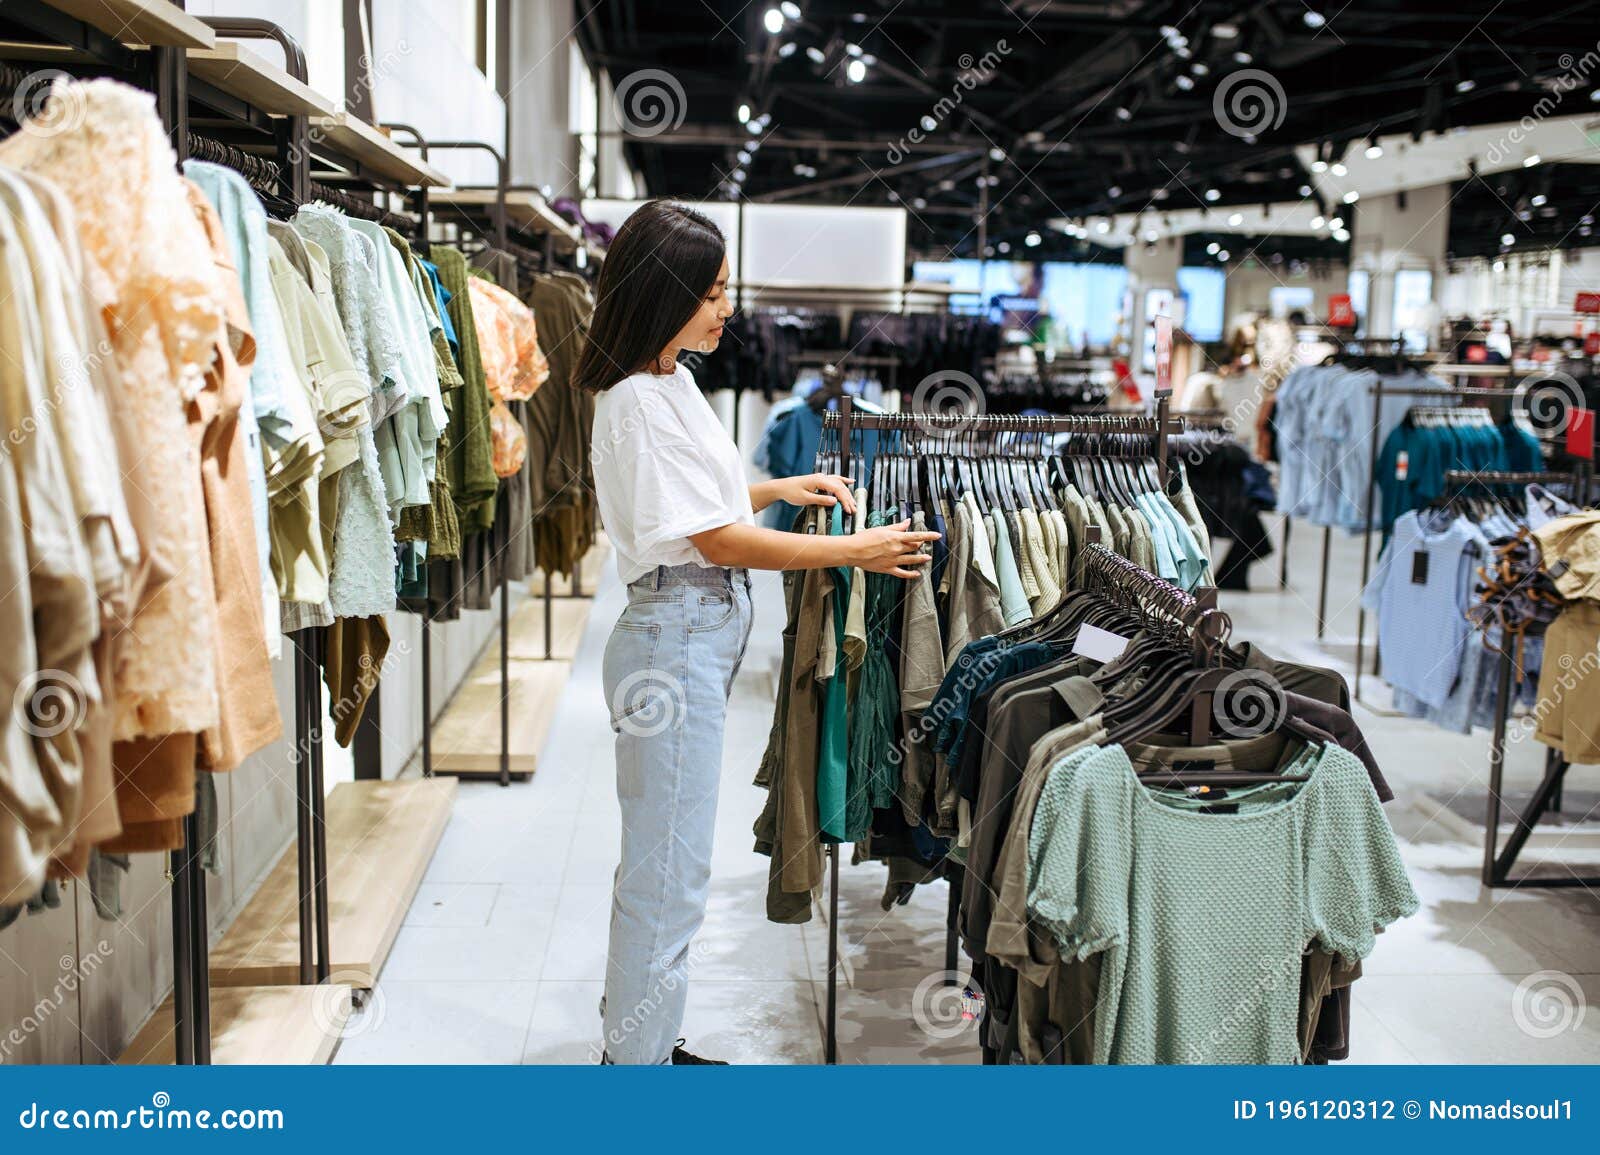 Woman Choosing Clothes in Clothing Store Stock Photo - Image of mall ...